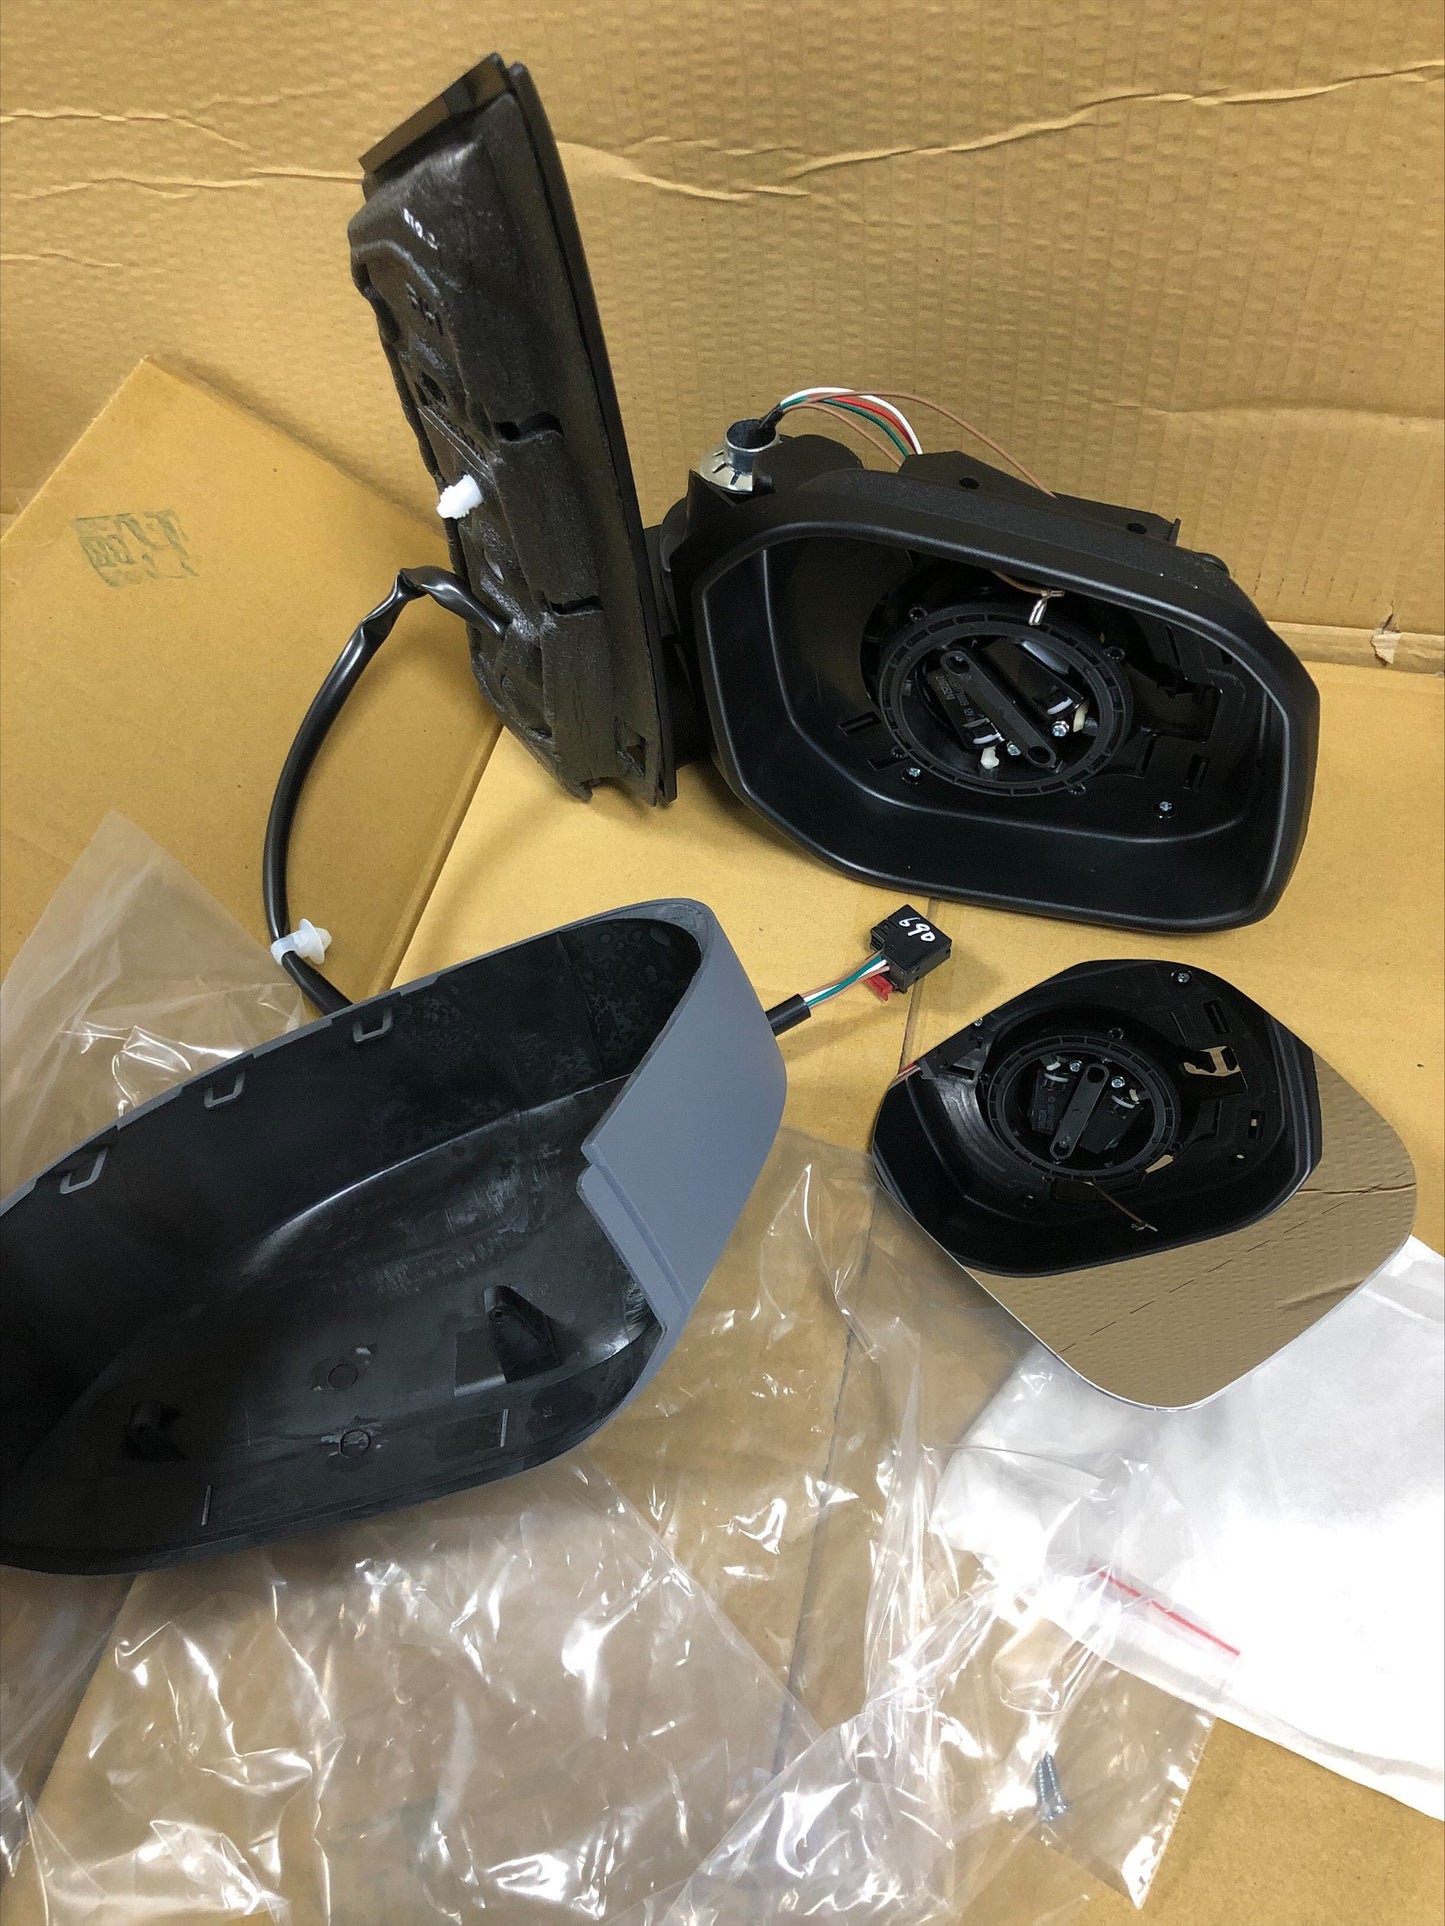 2004 2020 VW Caddy Life Upgrade Wing Door Mirrors HEATED ELECTRIC POWER FOLD KIT